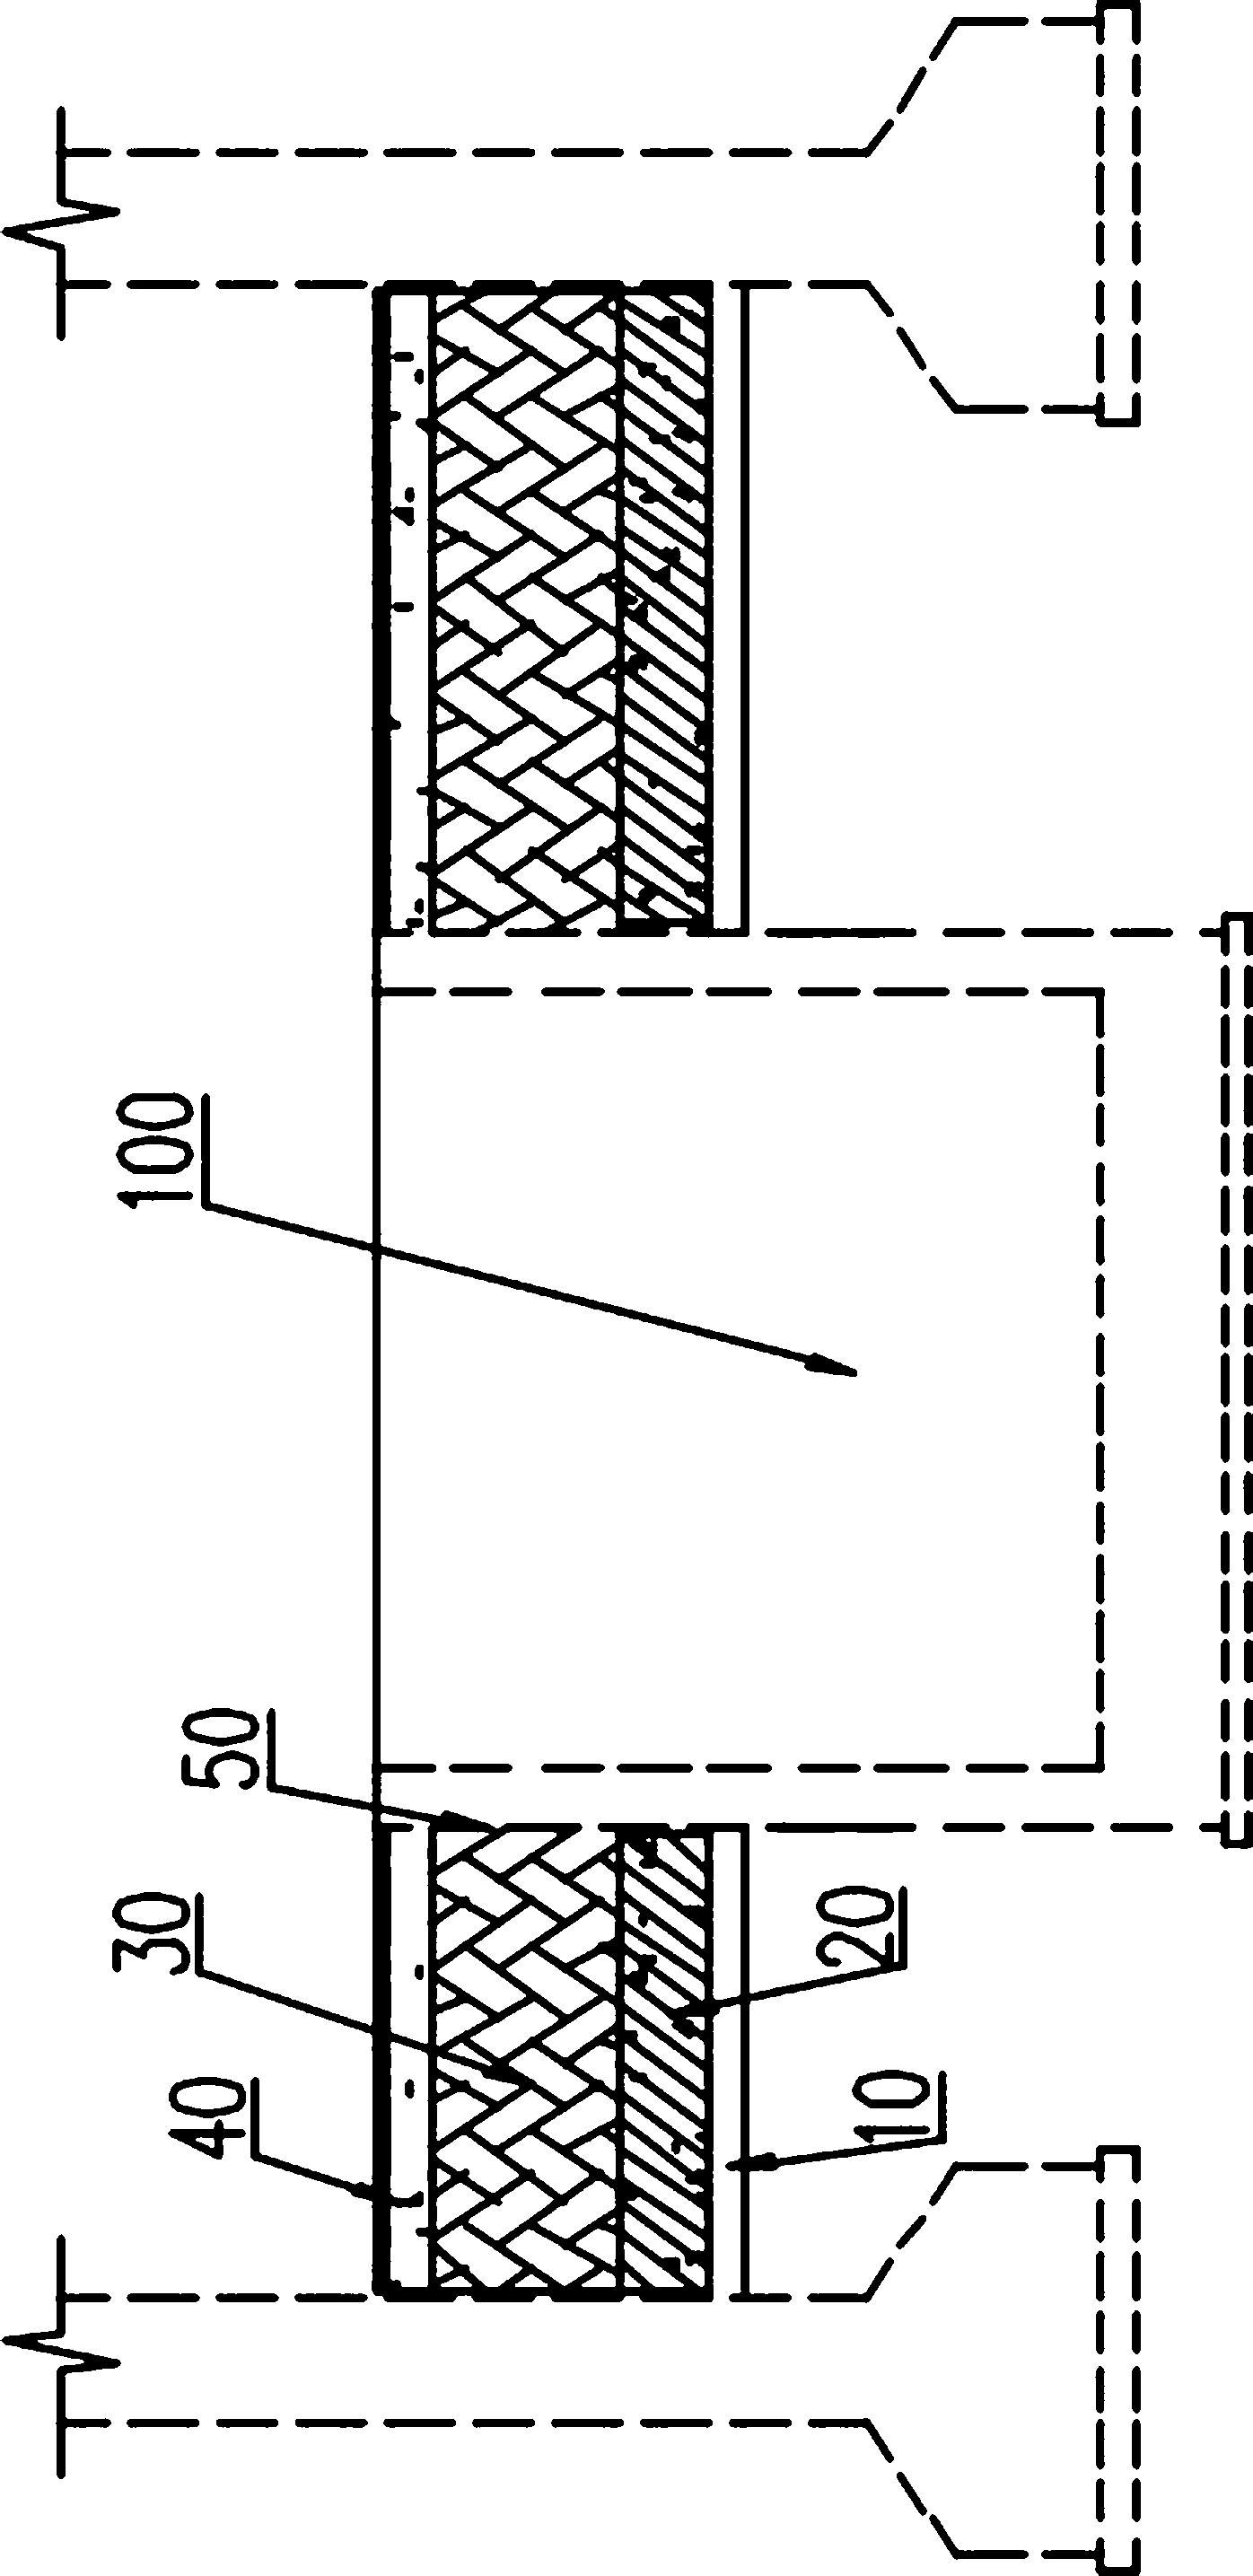 Structure of apparatus and buttress integrated foundation in steam turbine room